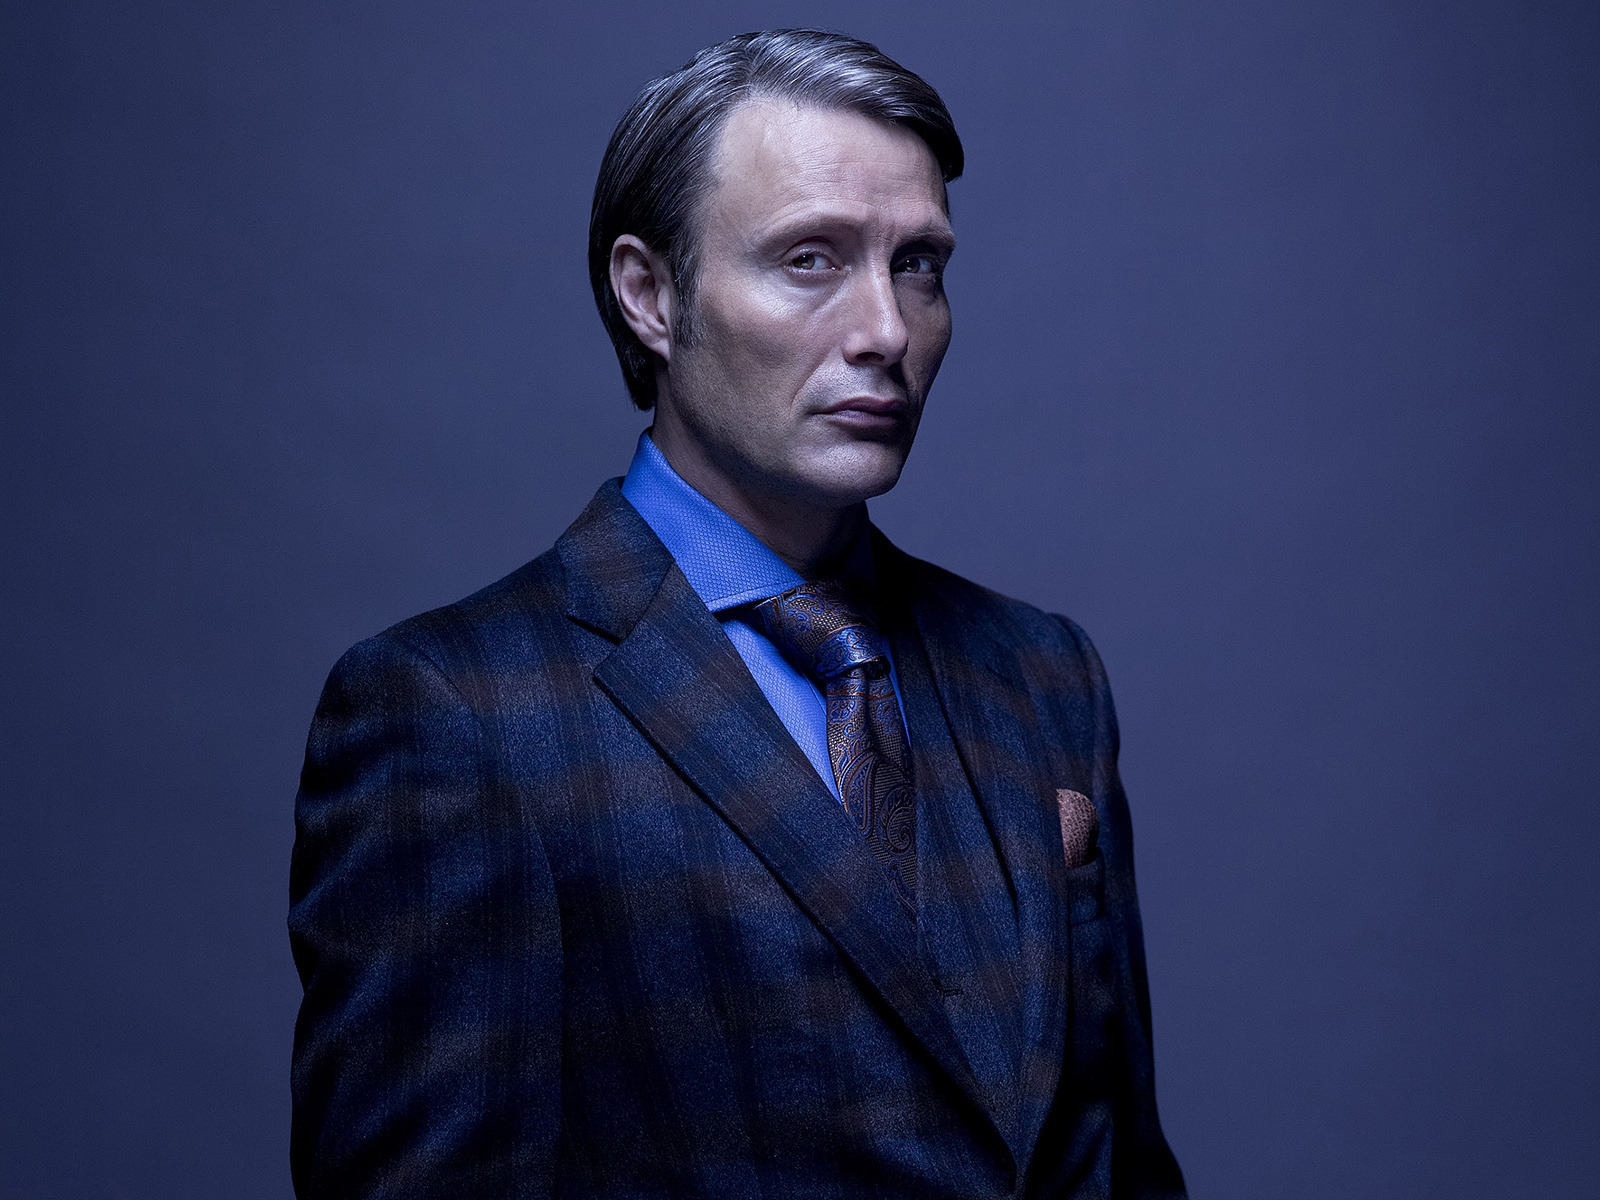 Hannibal Lecter for 1600 x 1200 resolution